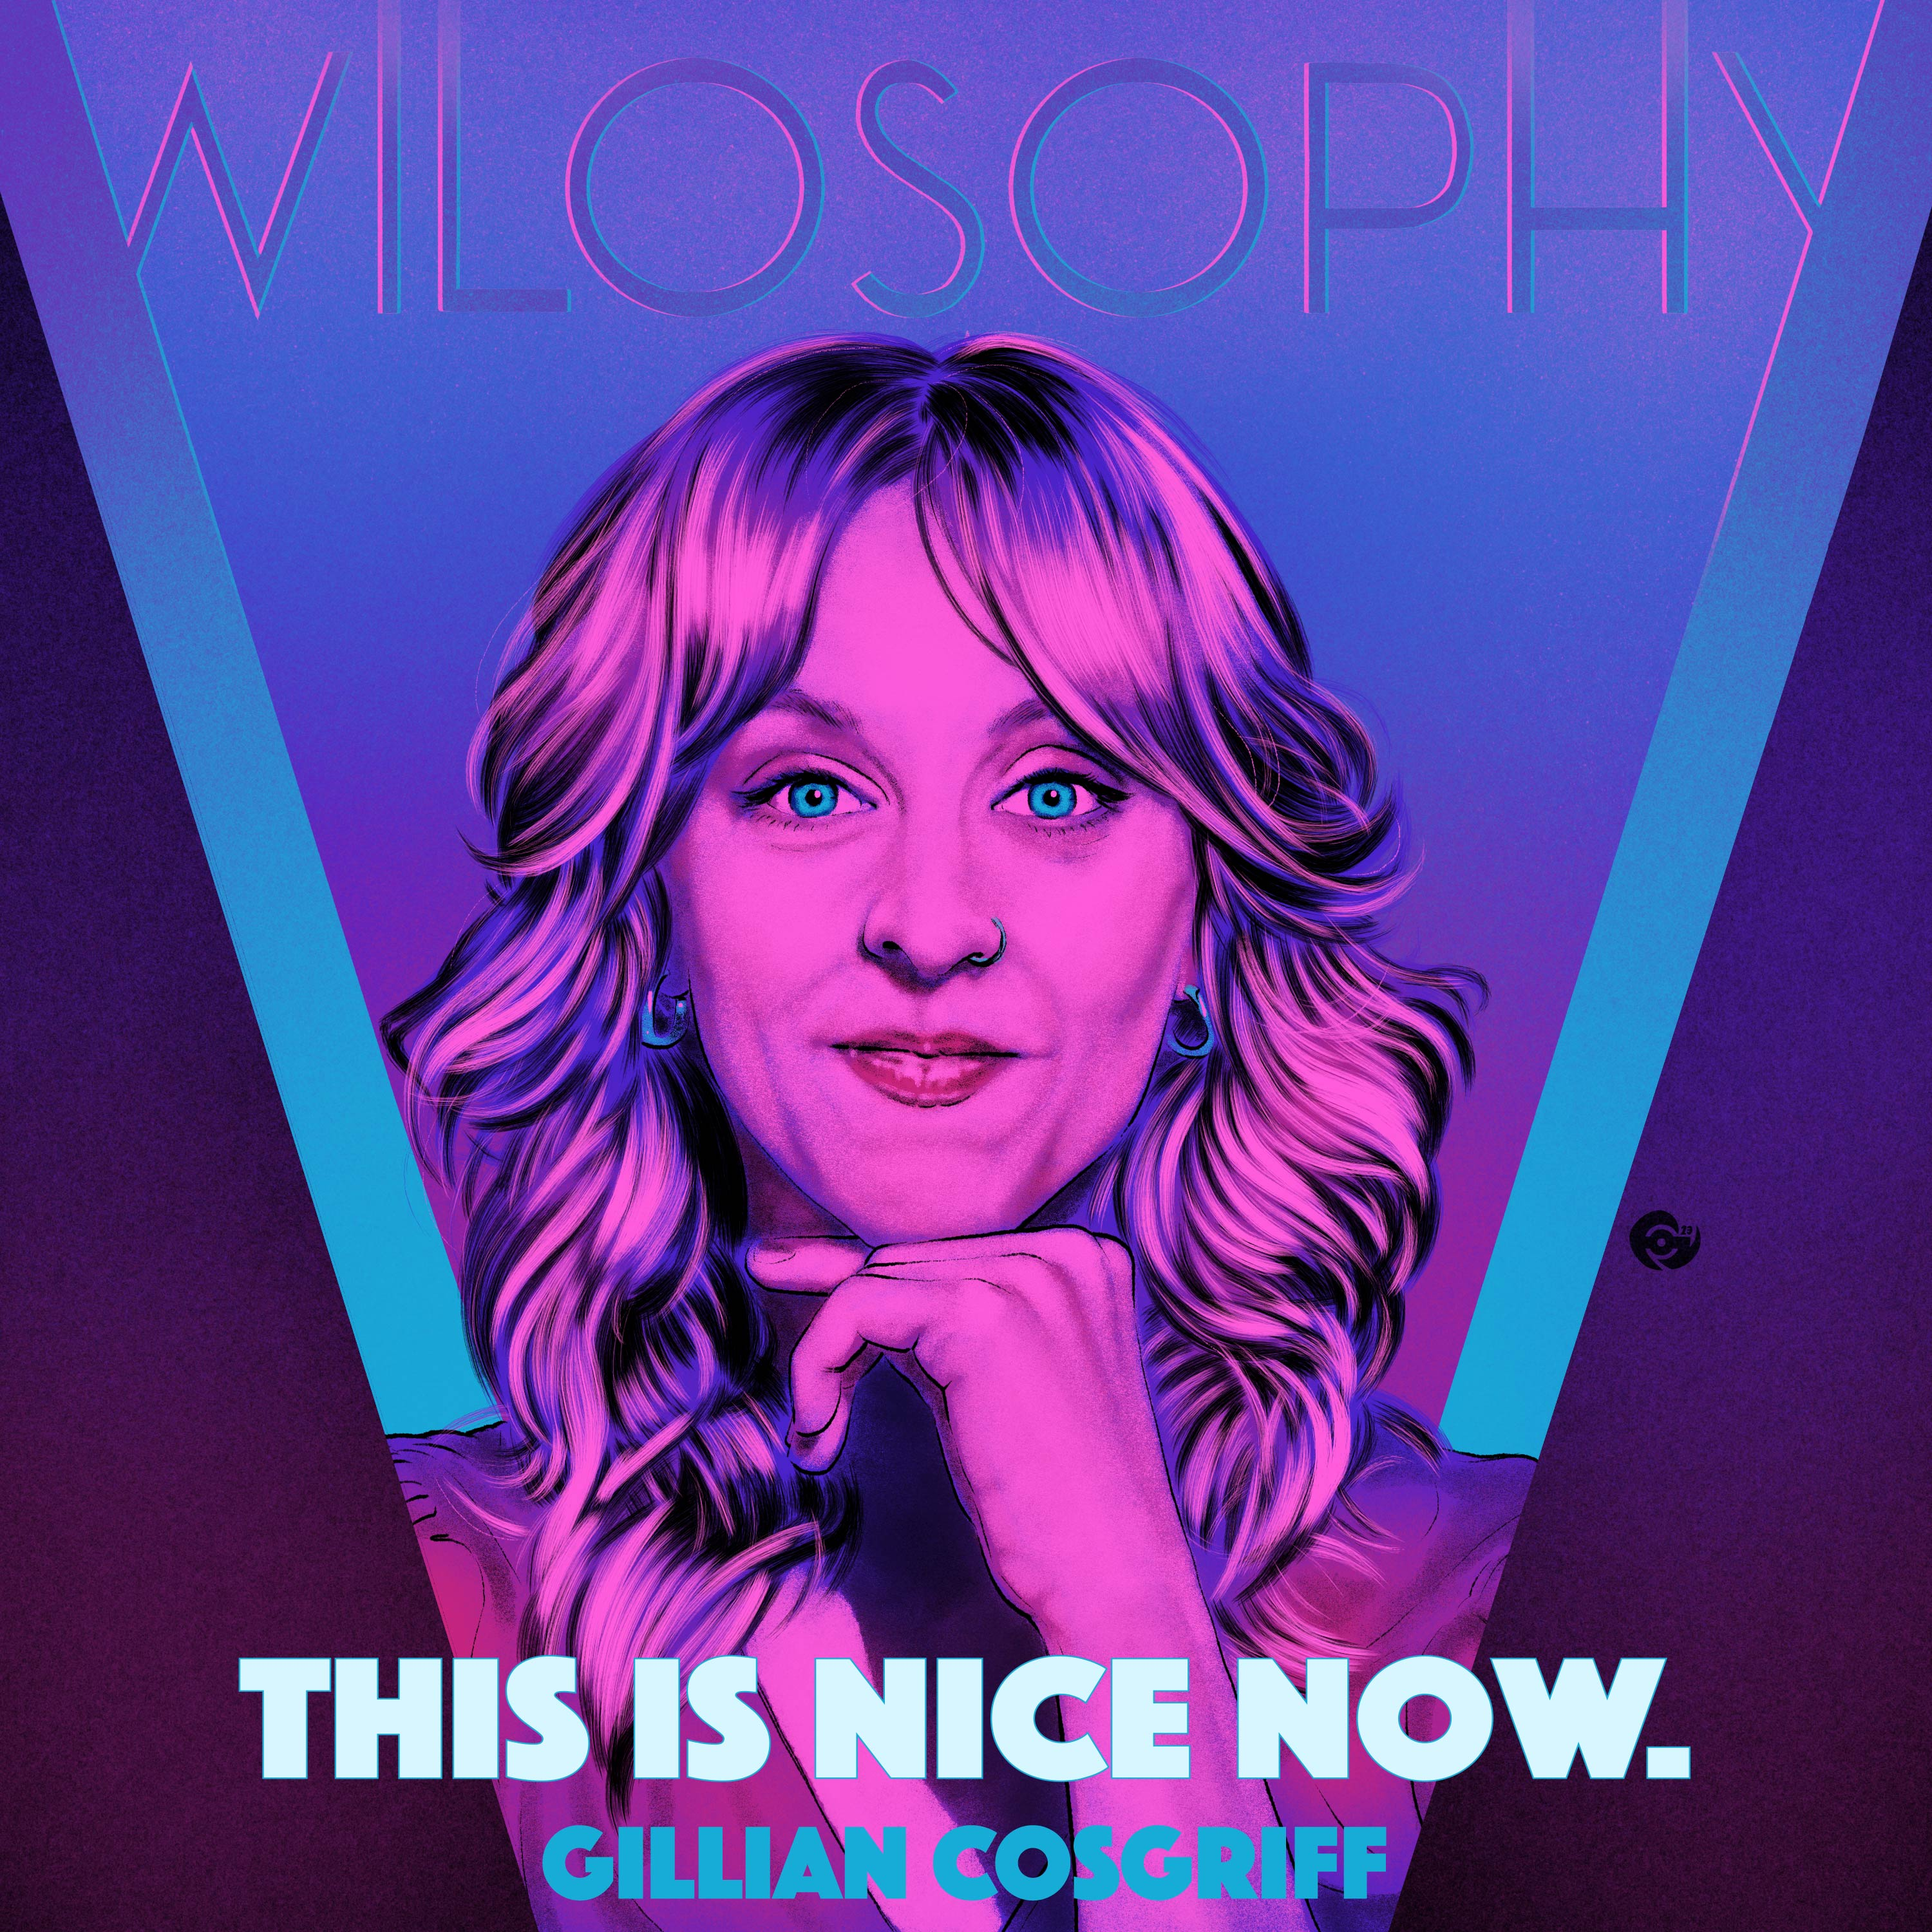 WILOSOPHY: Gillian Cosgriff - This Is Nice Now.